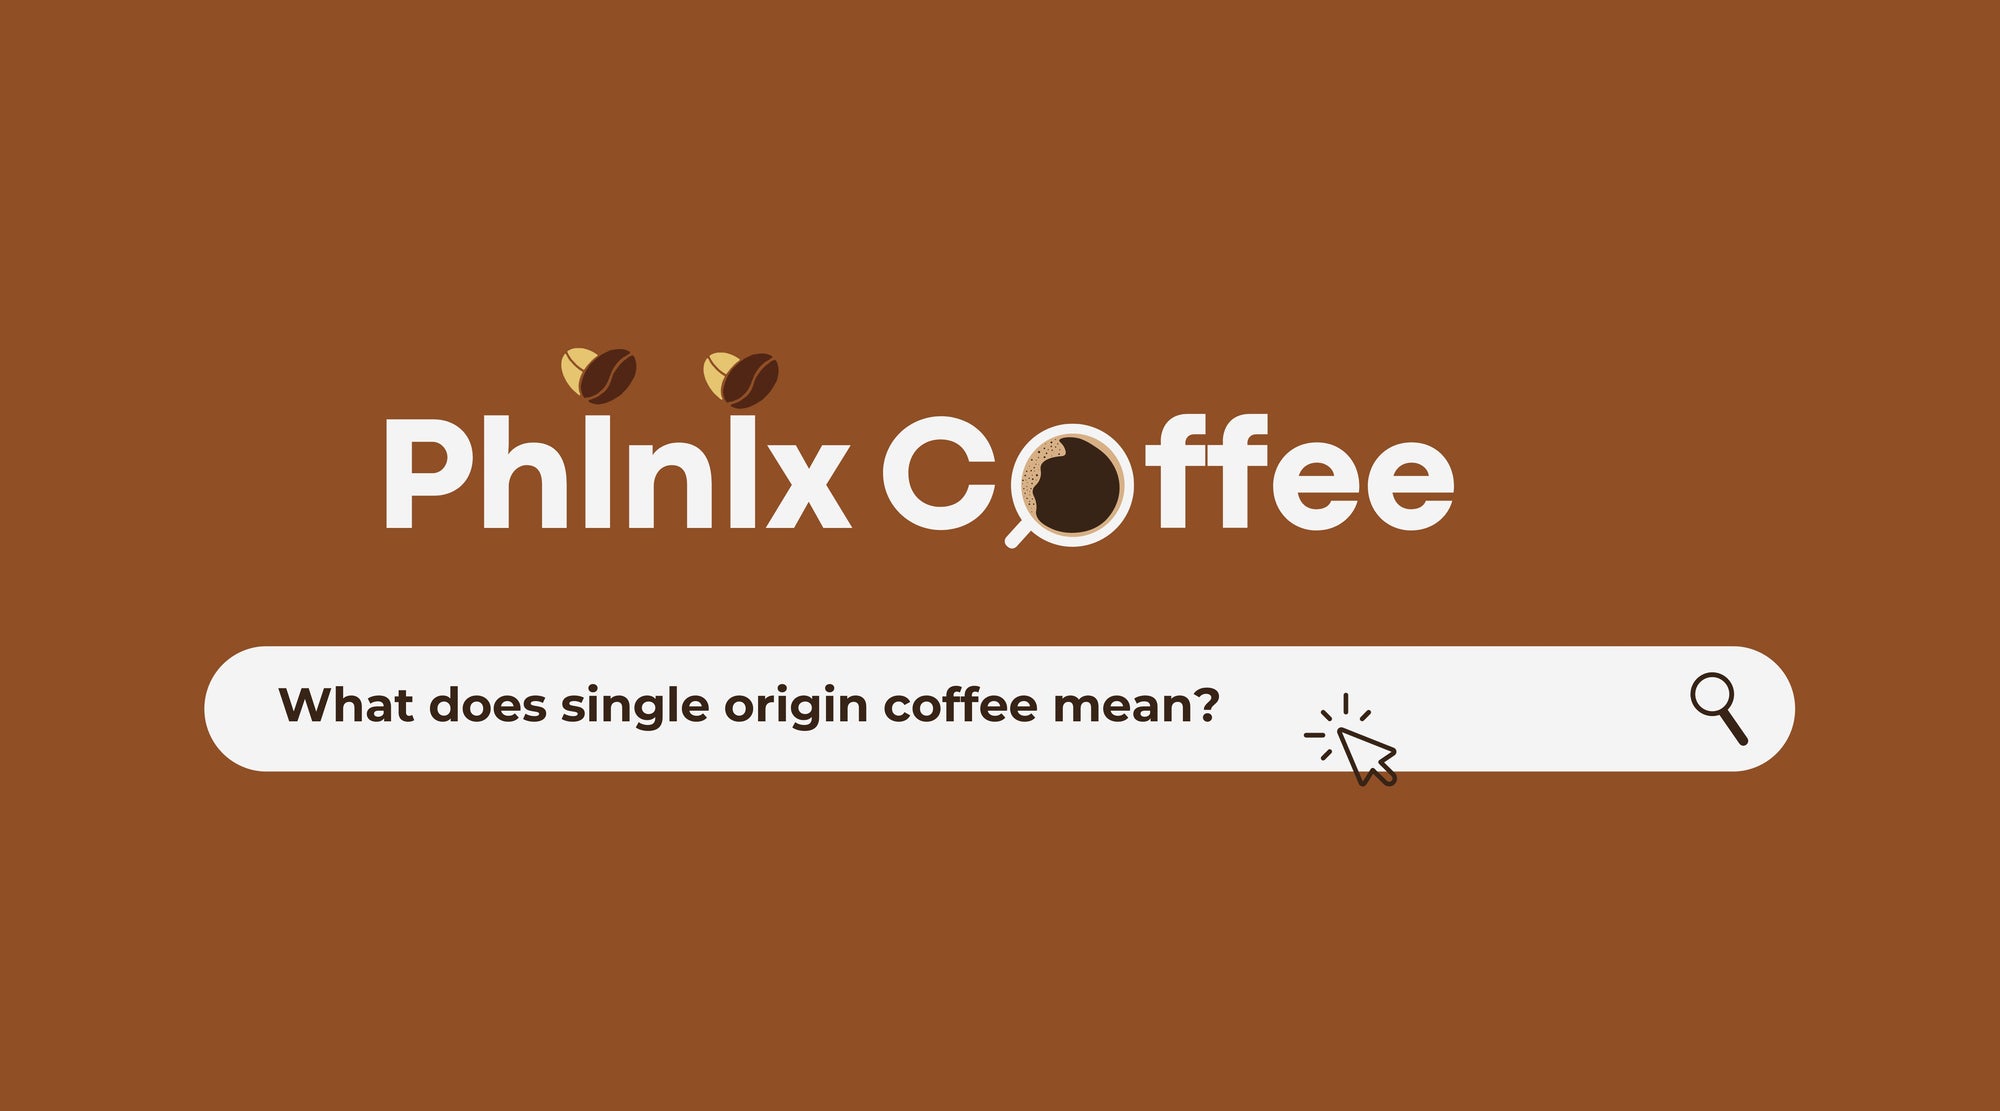 What does single origin coffee mean